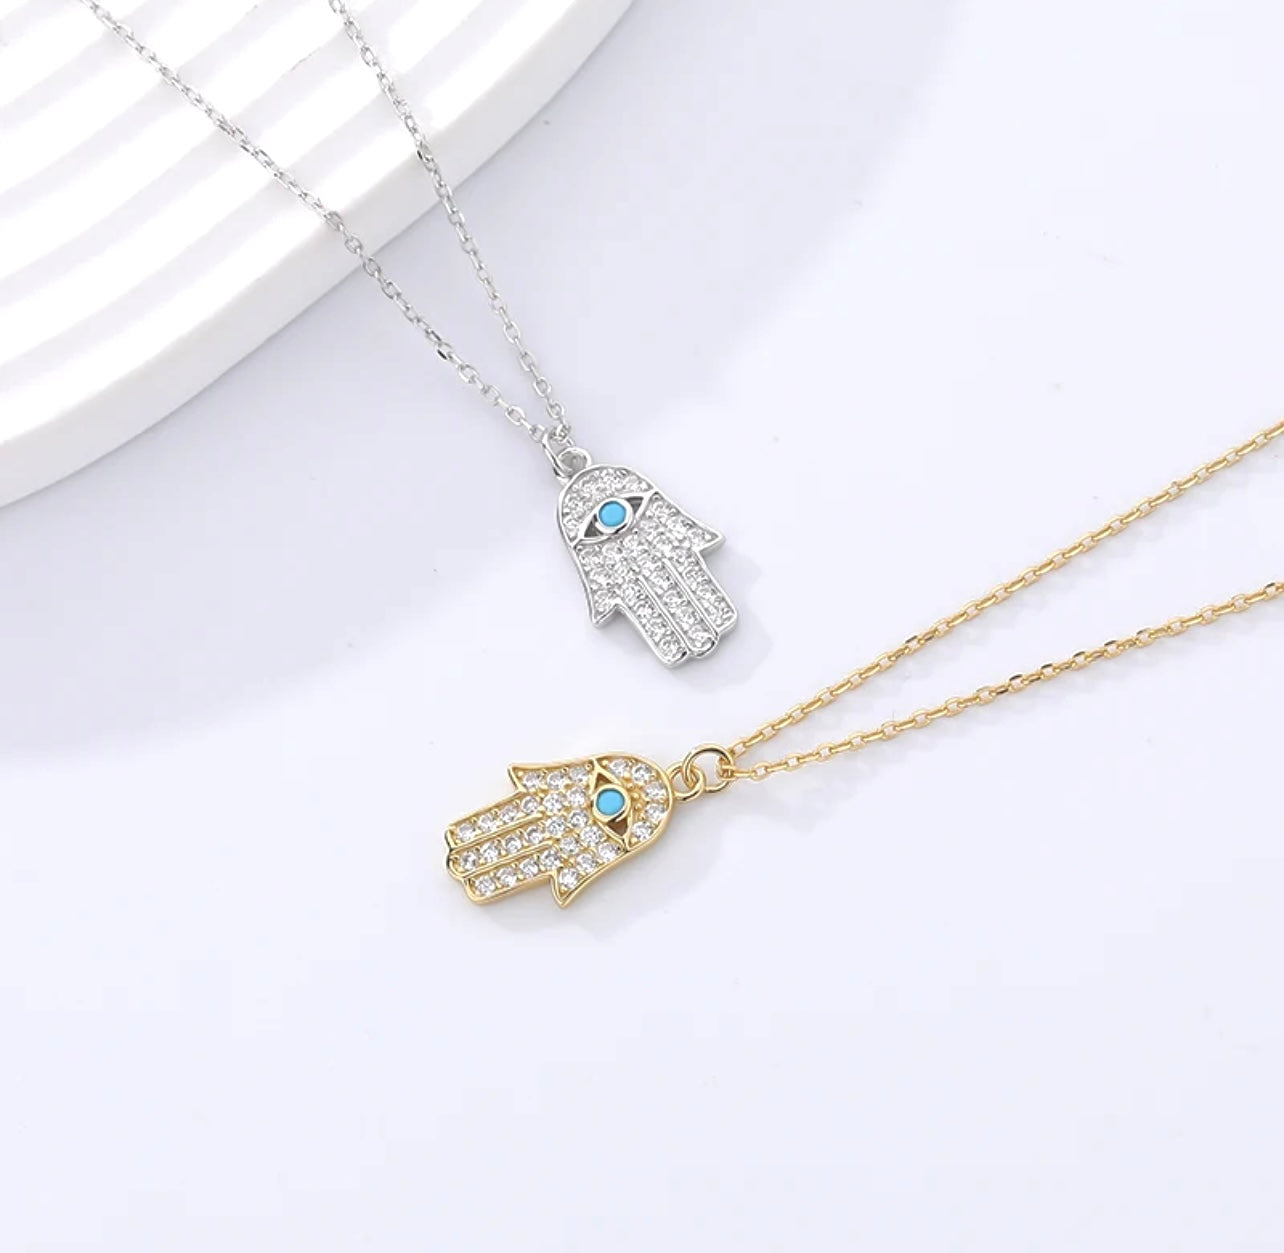 Turquoise Zircon Hamsa Hand Necklace 18K Gold over Sterling Silver